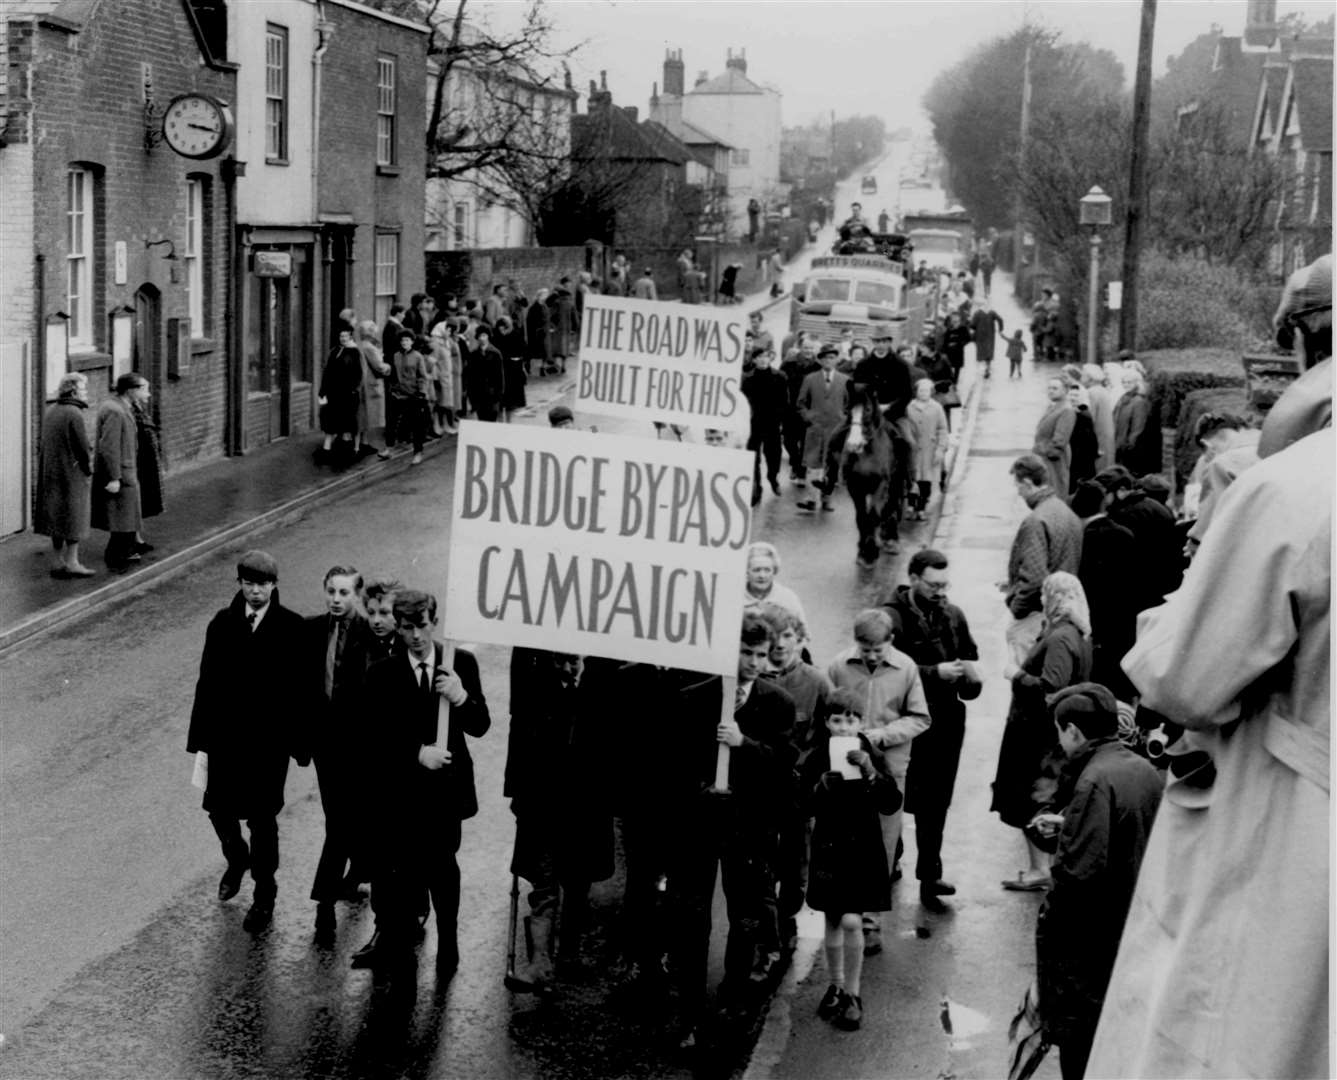 The protest through the streets of Bridge on Easter Sunday 1964.